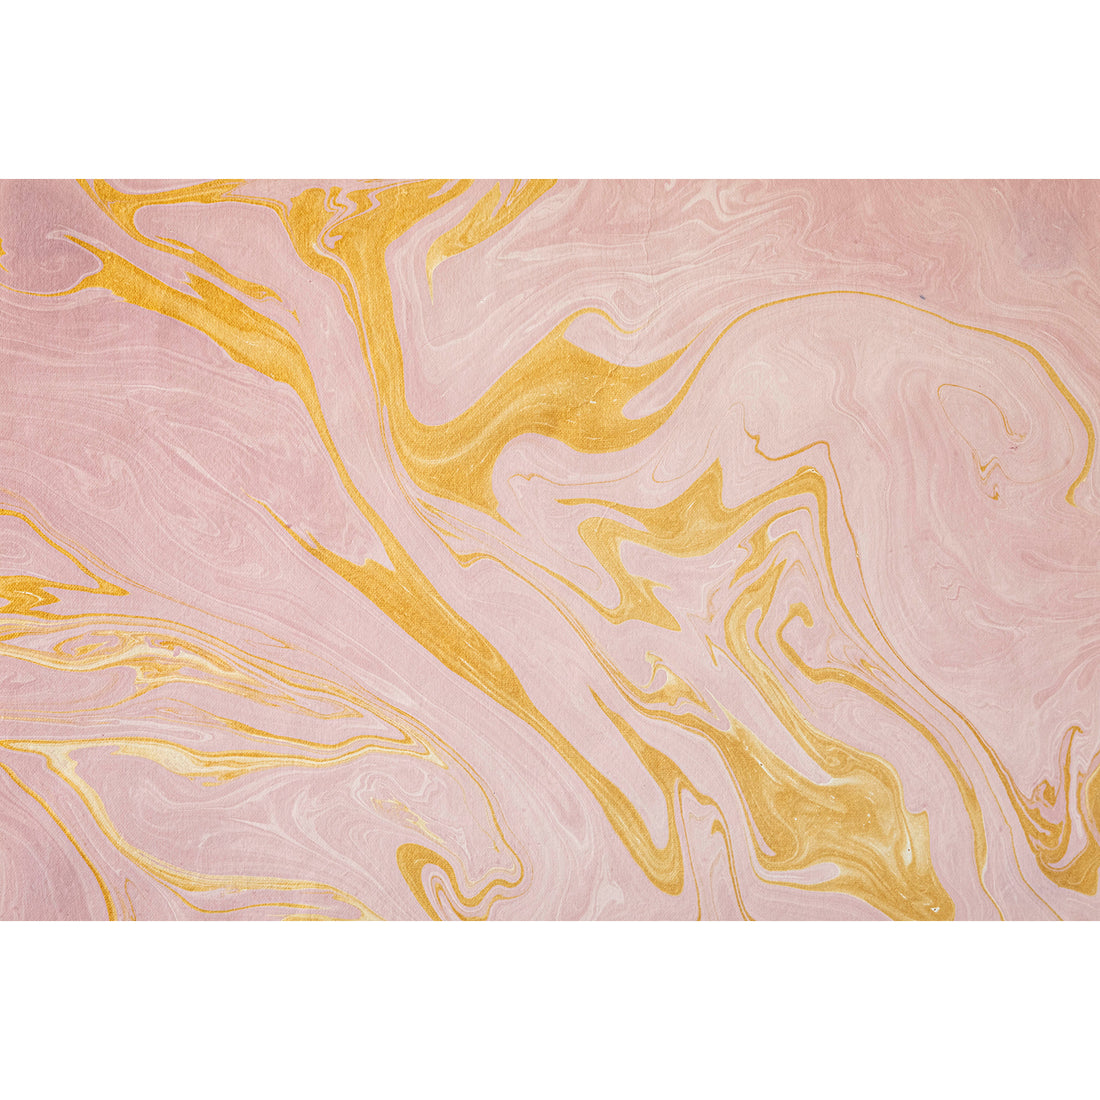 An abstract, marbled pattern of shimmering gold swirled with light pink.